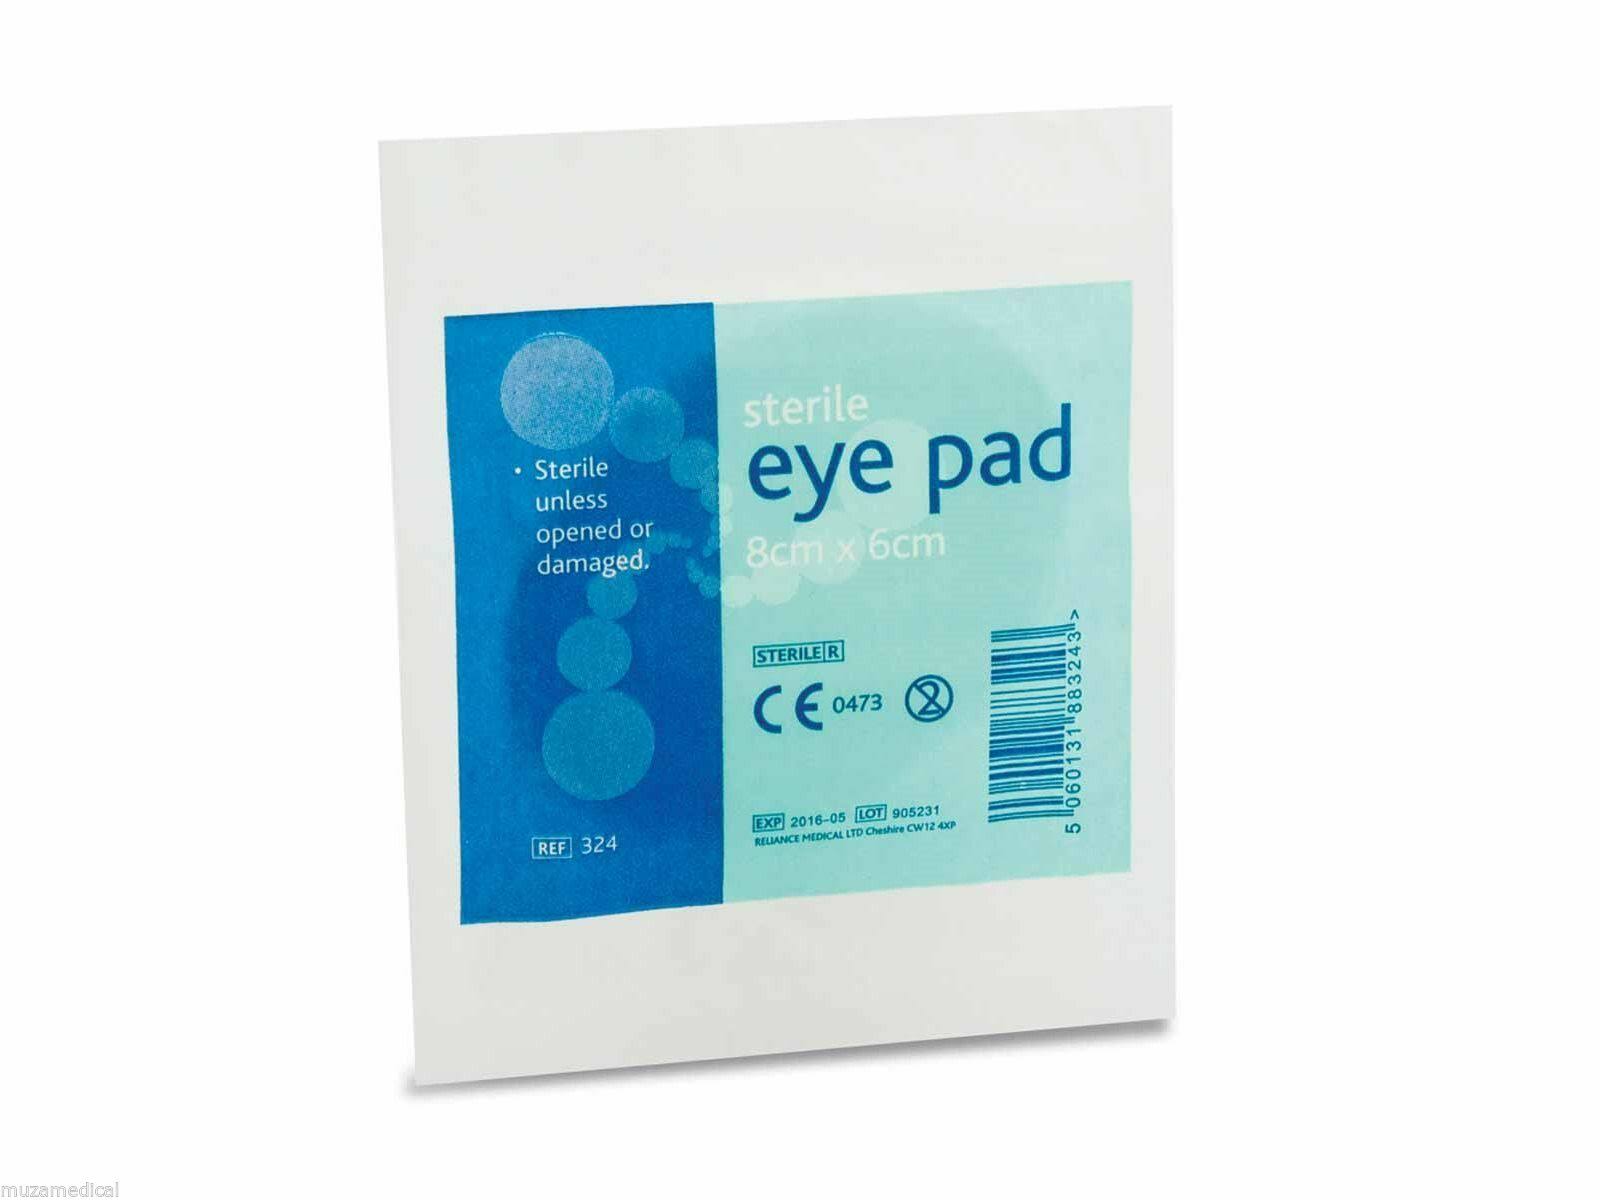 Reliance 324 HSE Sterile Wound Dressing Eye Pad 7.5 x 5.5cm